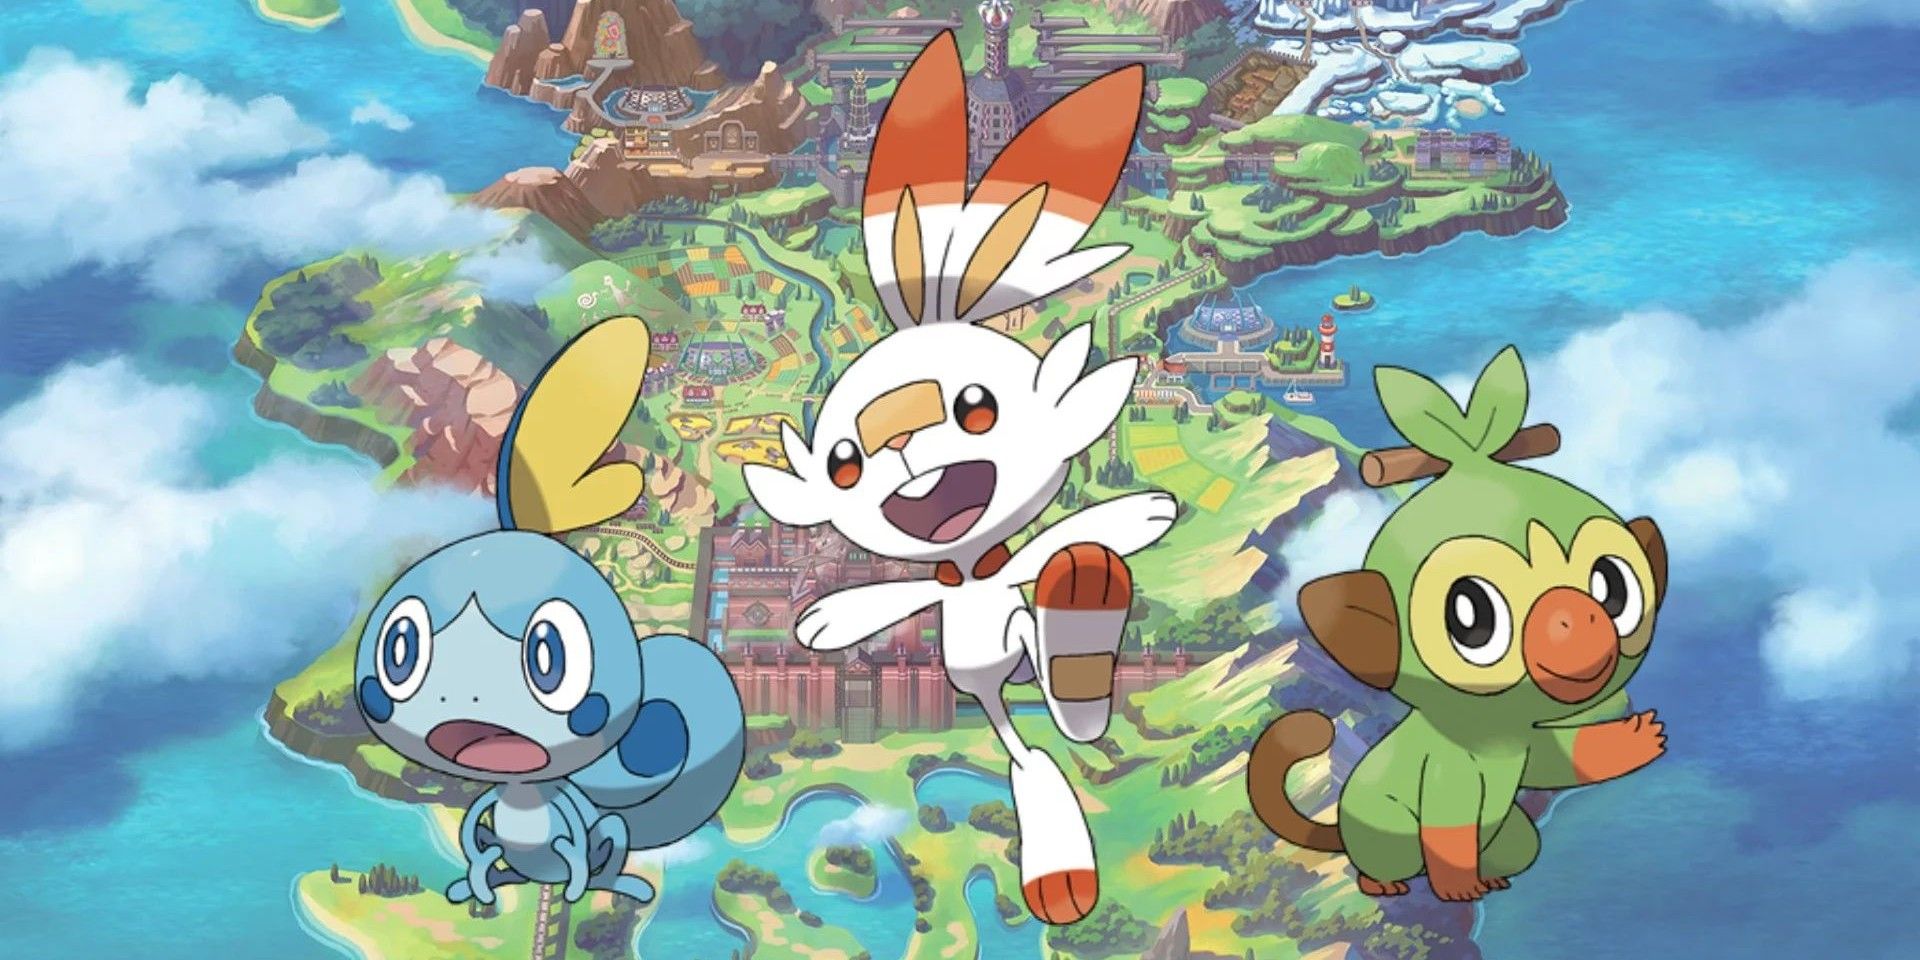 Pokémon Sword and Shield's three starters over a map of Galar.